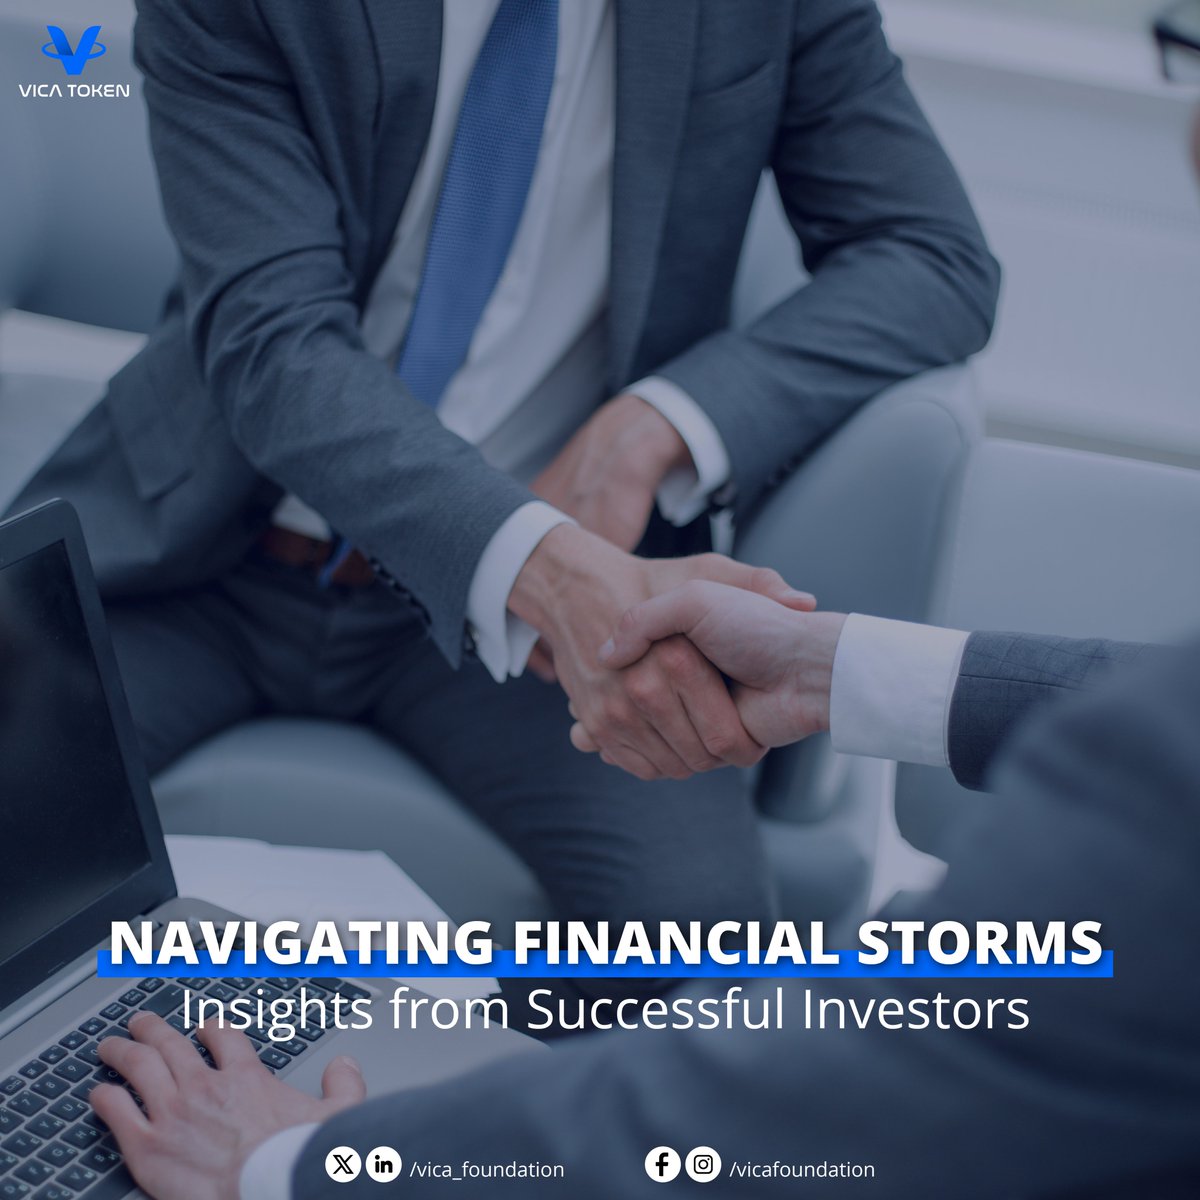 In the financial seas, successful investors light the way through storms, turning crises into opportunities. Discover insights and strategies at vica.global 🌊💼 to navigate with confidence.

#Investment #FinancialMarket #Bitcoin #VicaToken